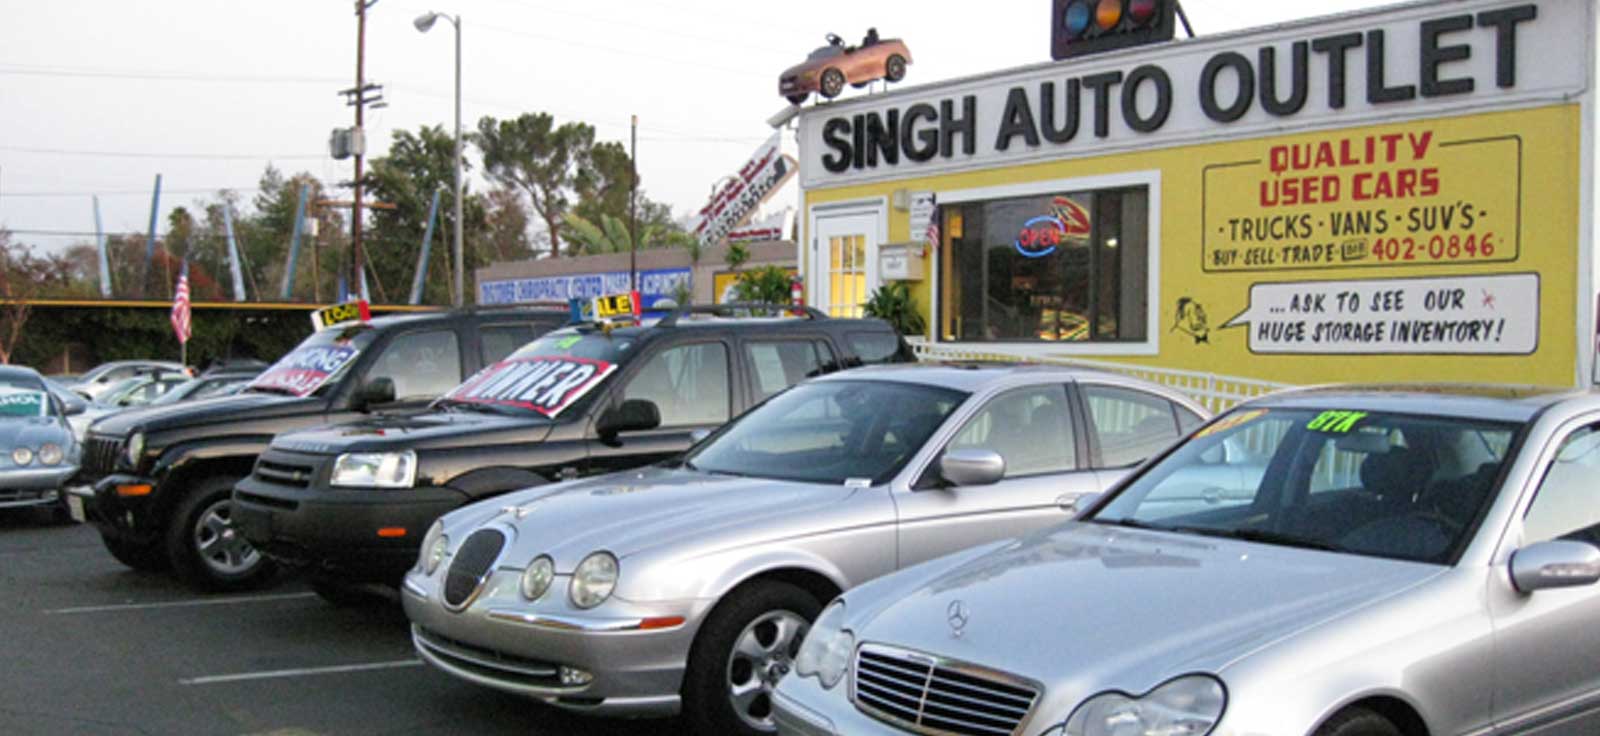 Singh Auto Outlet Car Dealer In North Hollywood Ca